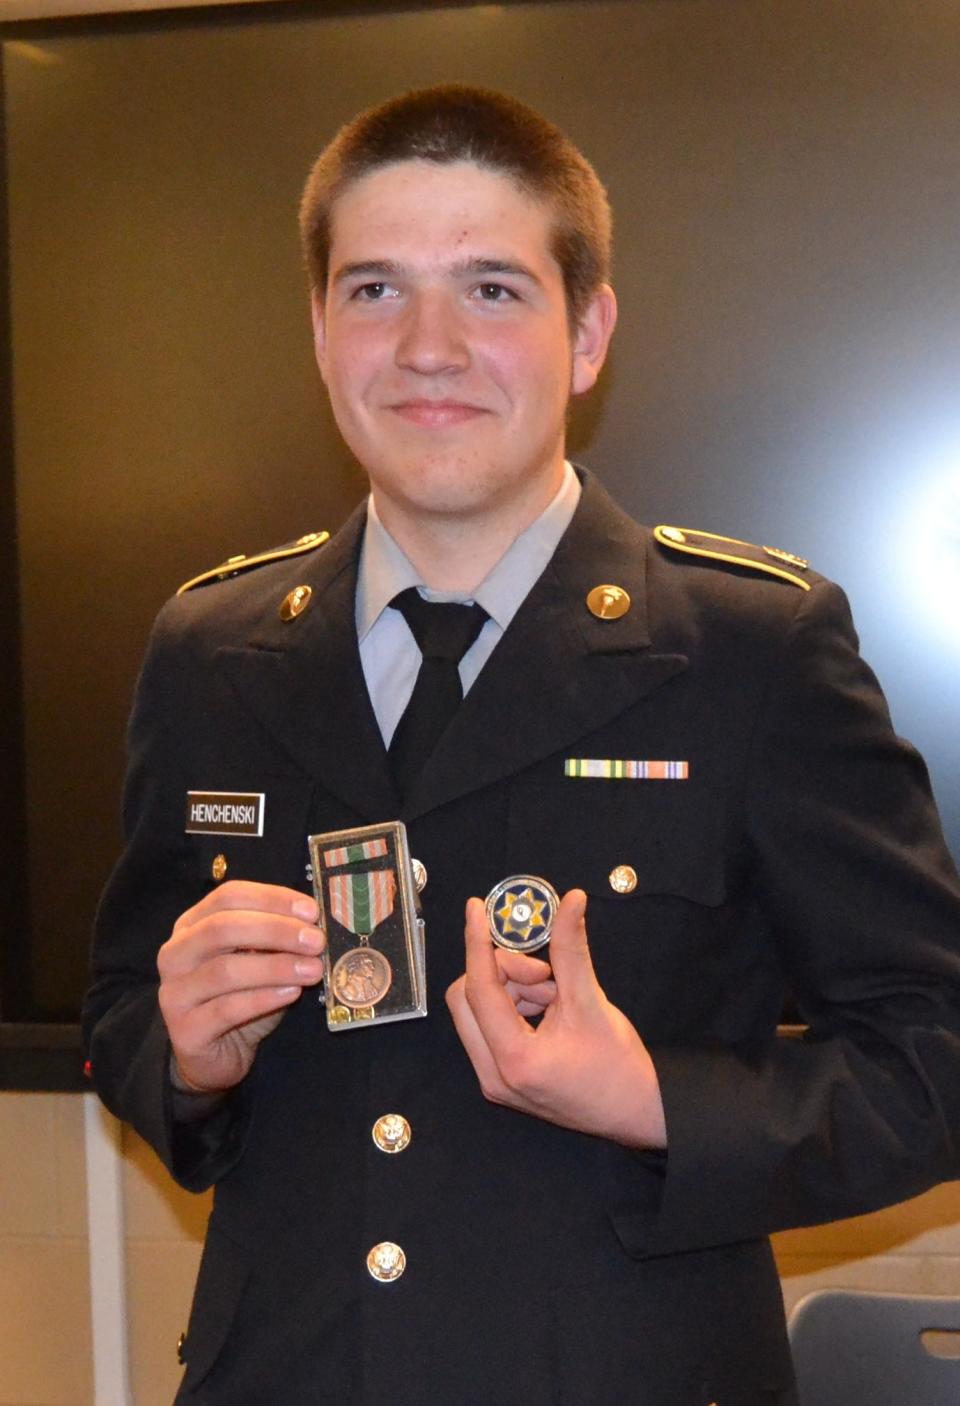 Gage Hencheski, a first sergeant in the JROTC program at Poudre High School in Fort Collins, Colo., shows off the Meritorious Commendation Ribbon and challenge coin he received during a ceremony Wednesday honoring him for his efforts to help a man pinned overnight underneath his crashed truck.